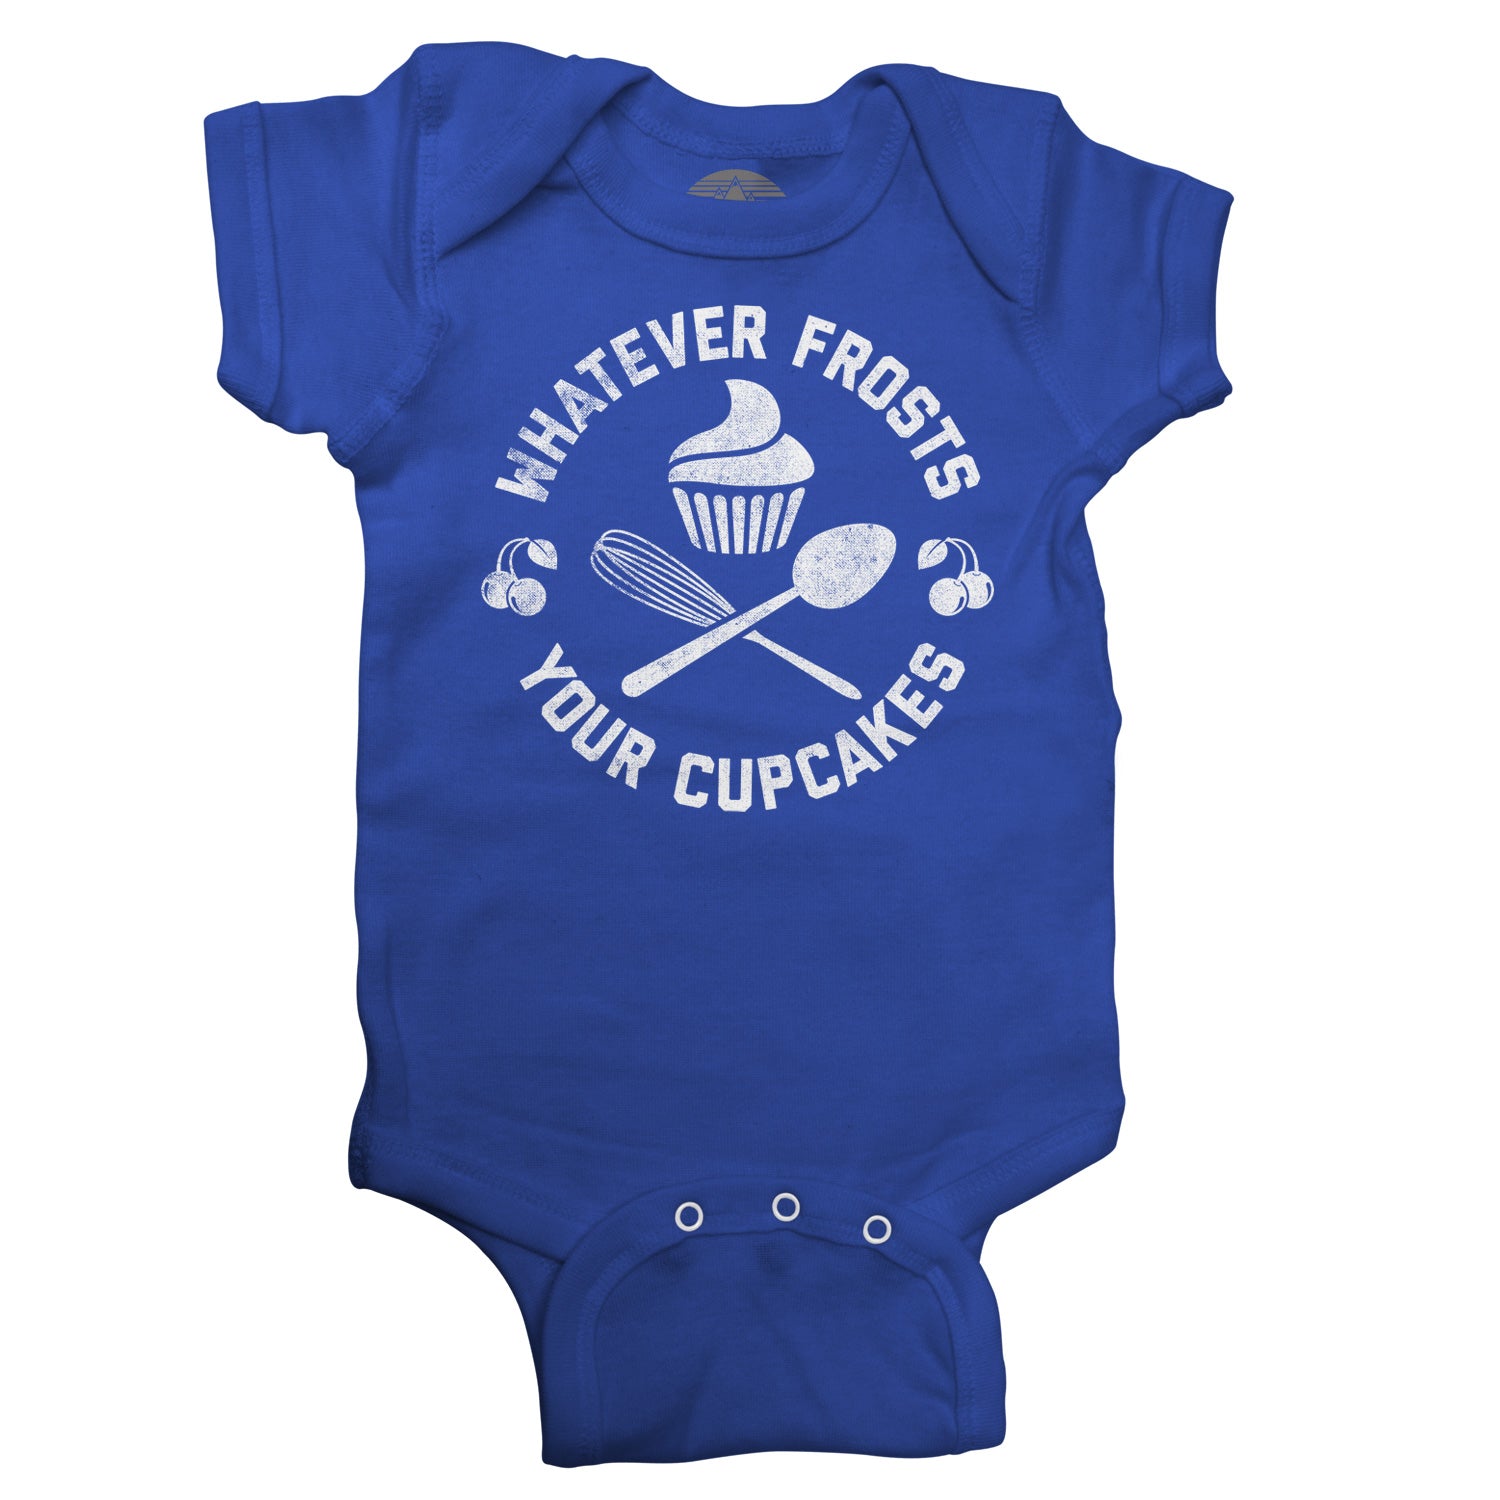 Whatever Frosts Your Cupcakes Infant Bodysuit - Unisex Fit